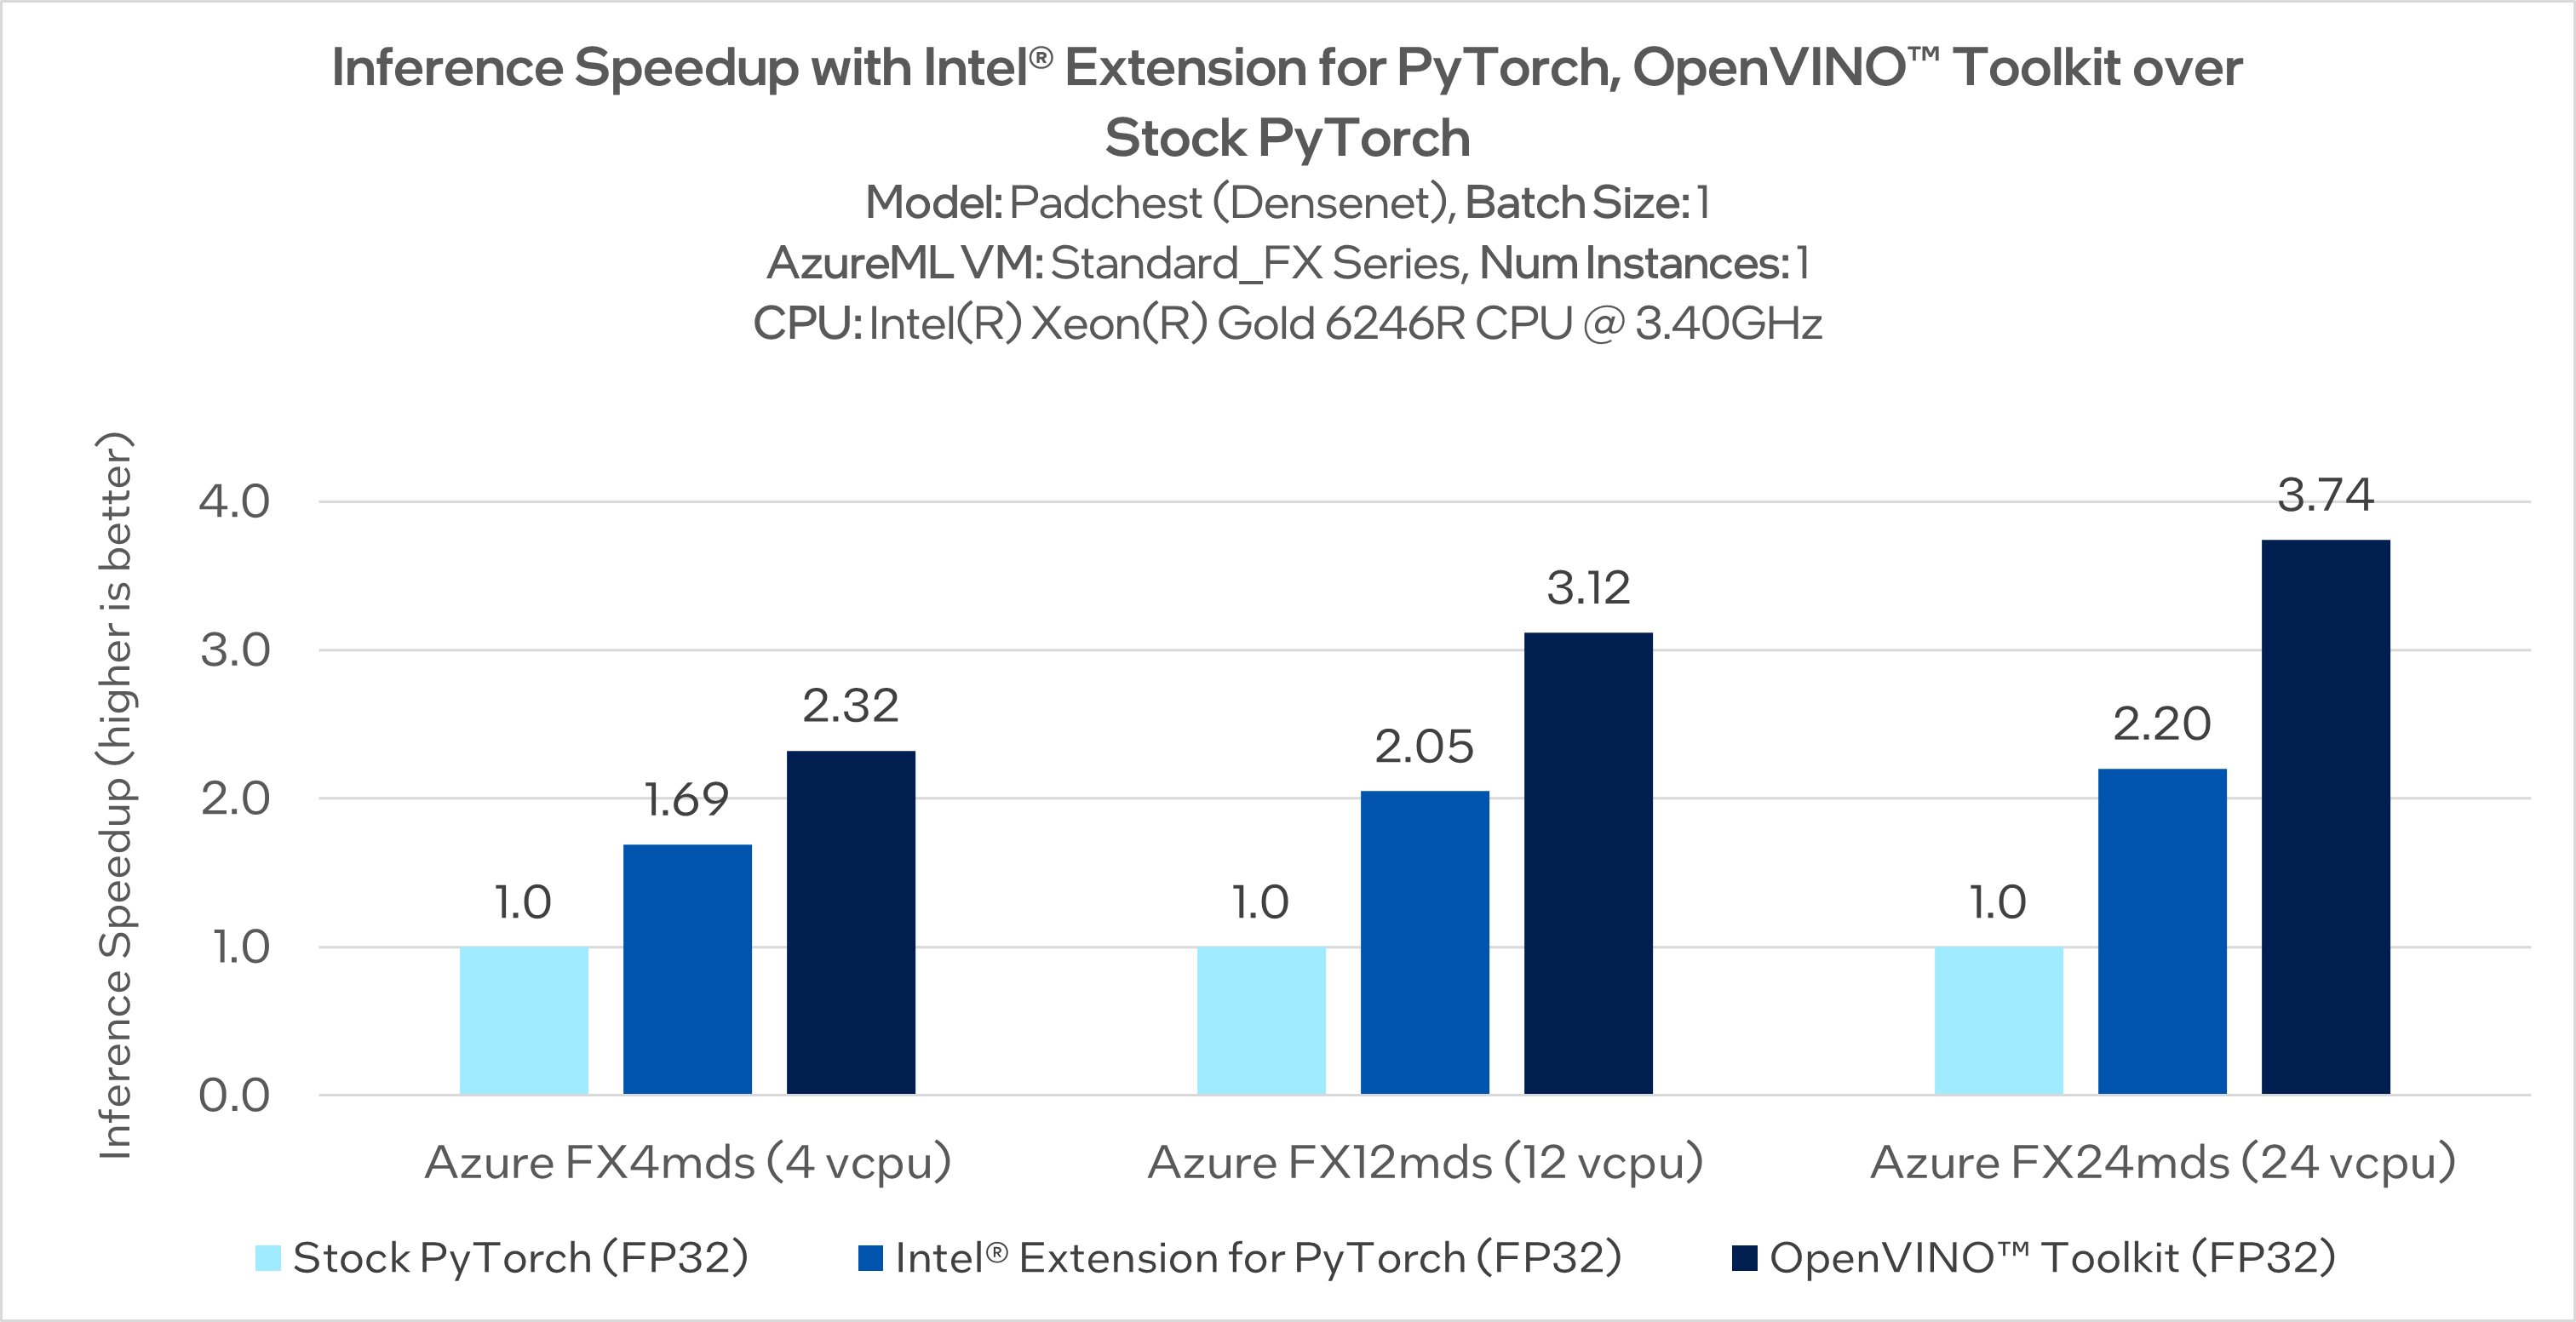 bar chart showing inference speedup with stock pytorch, Intel Extension for pytorch and openvino toolkit